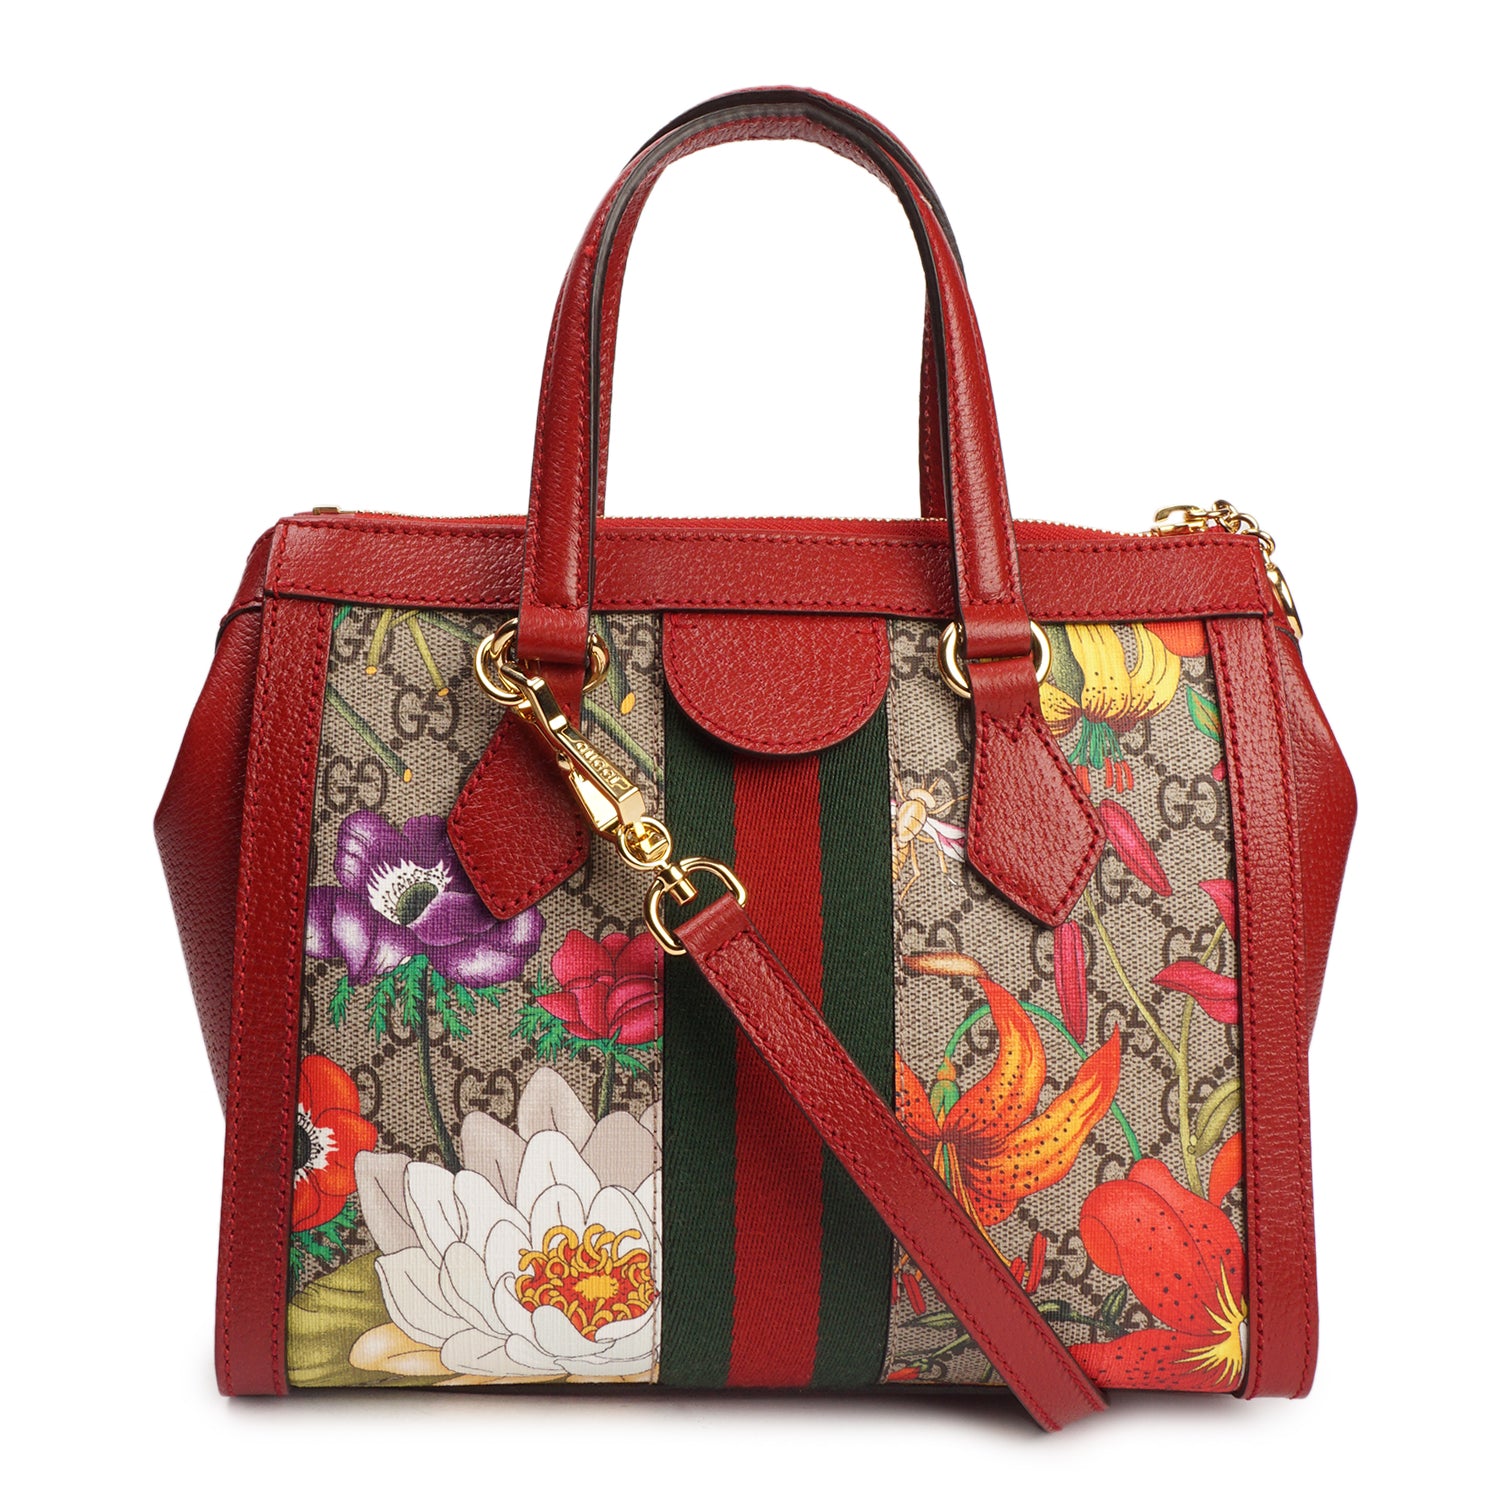 GUCCI OPHIDIA GG FLORA SMALL TOTE BAG IN RED